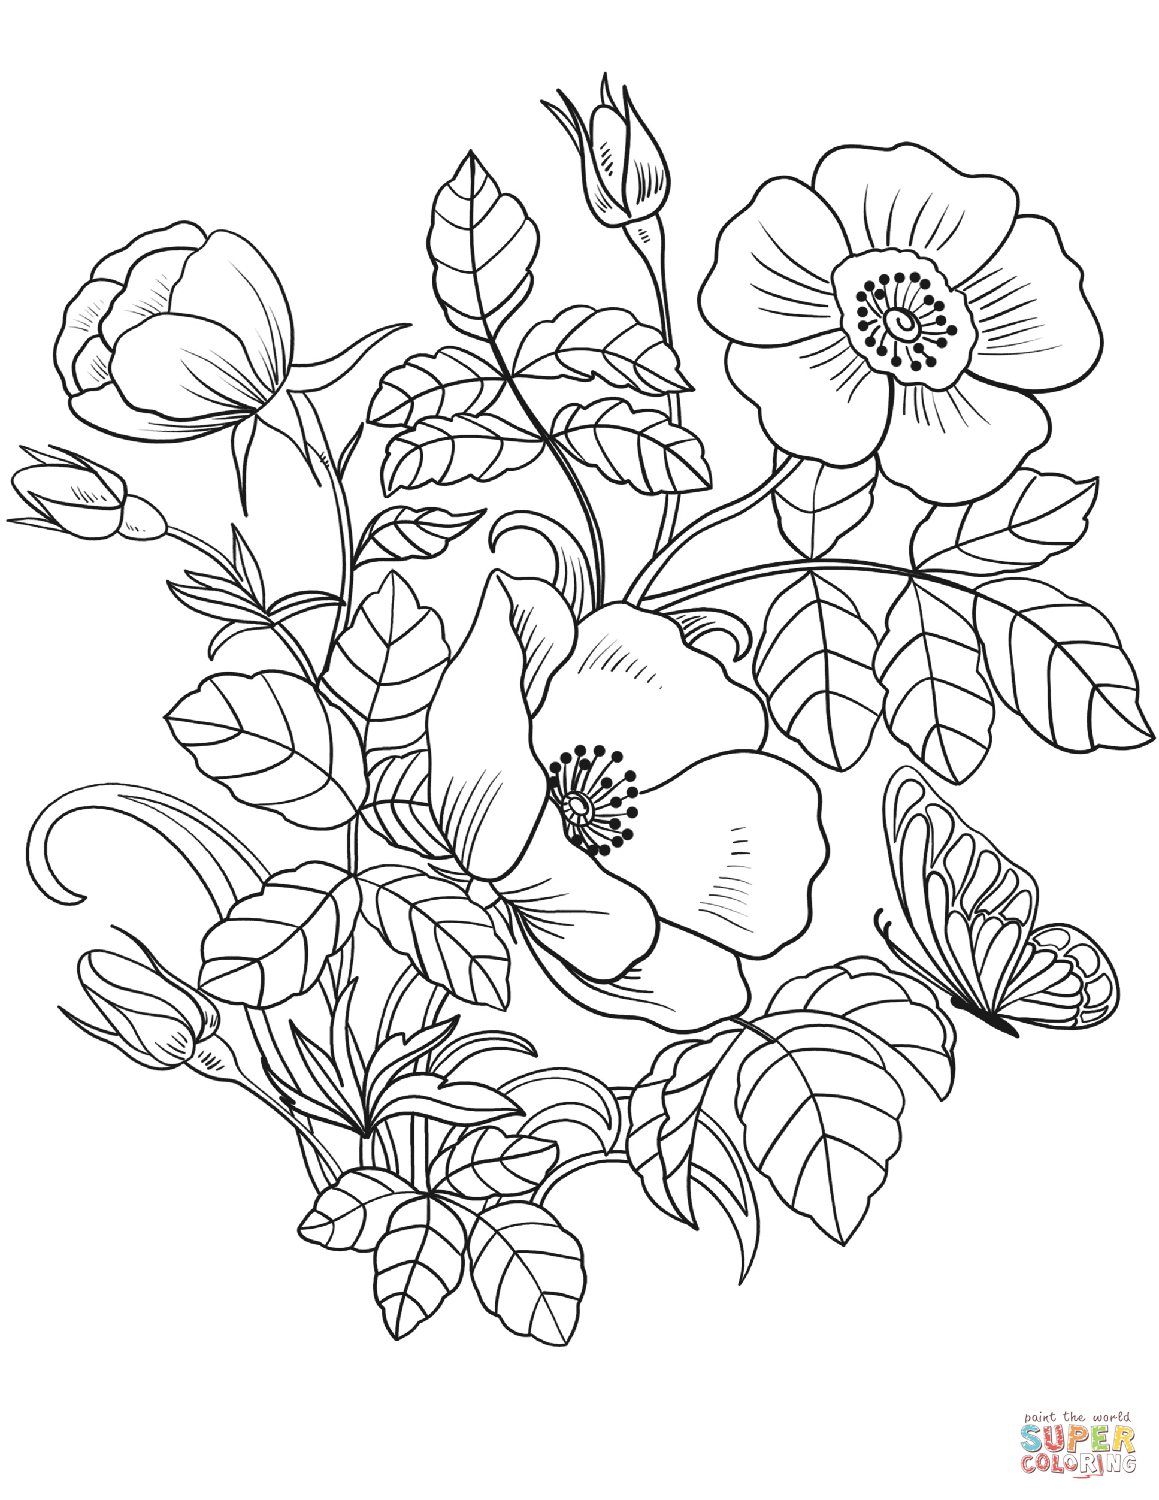 Spring Coloring Pages Spring Flowers Coloring Page Free Printable Coloring Pages